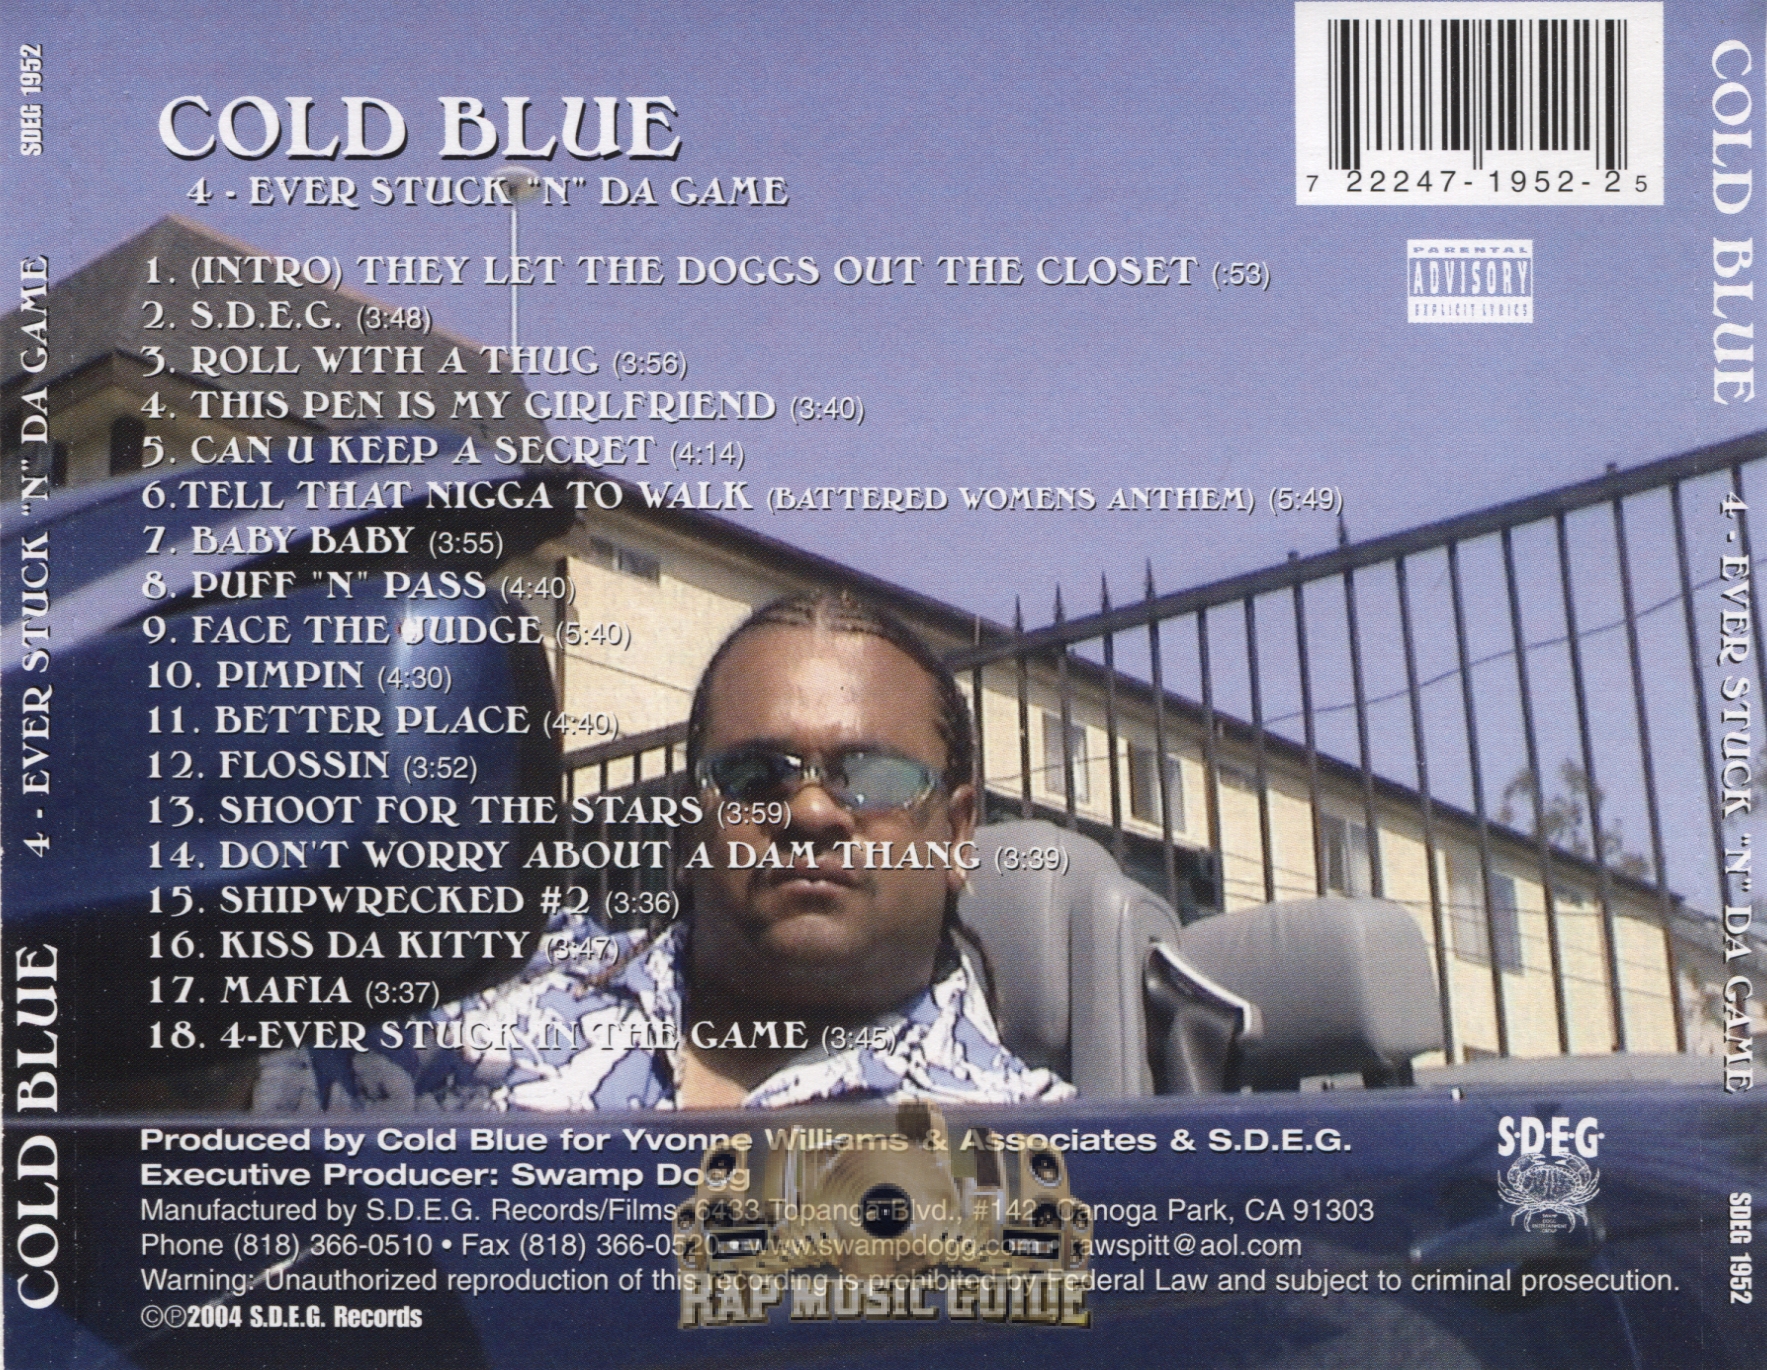 Cold Blue - 4 Ever Stuck 